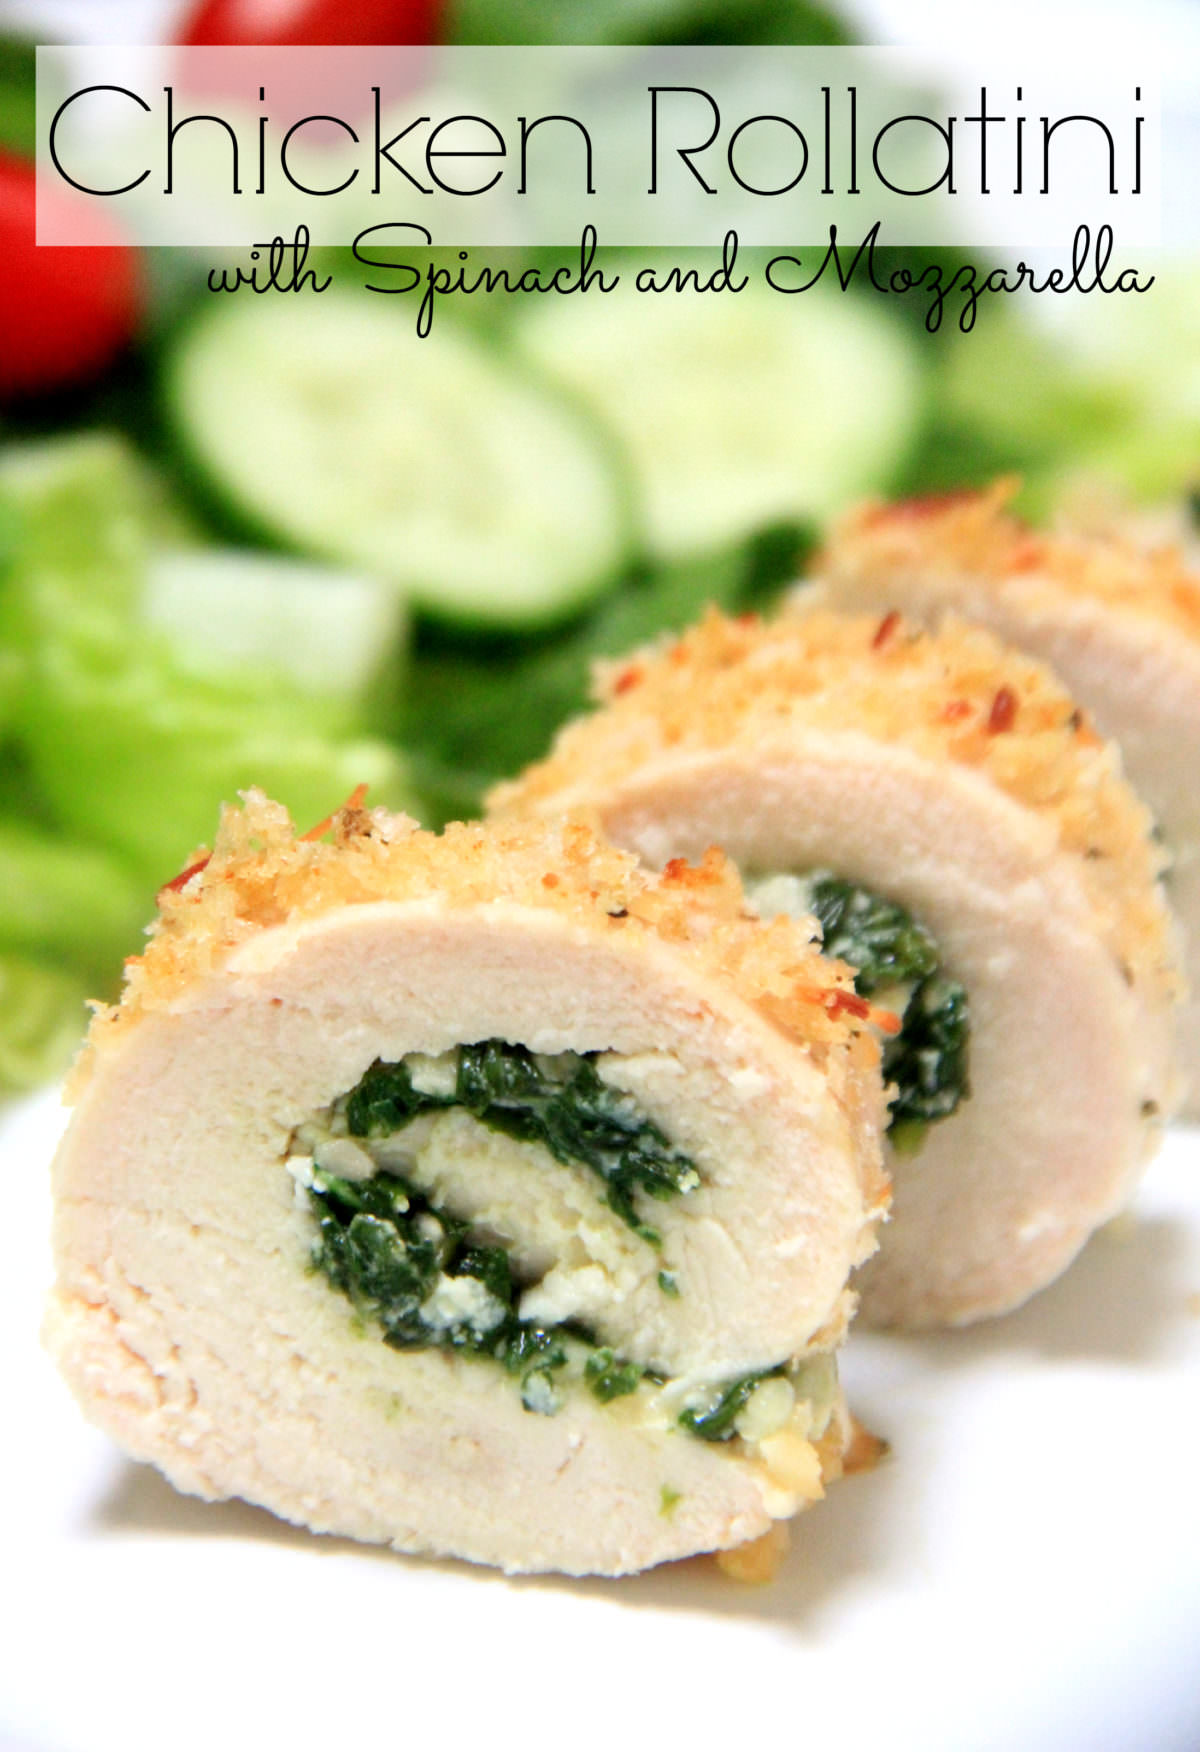 Roll up that boring chicken breast with spinach and mozzarella cheese to make this chicken rollatini masterpiece. High in protein and easy to make Keto friendly! via @mymommystyle